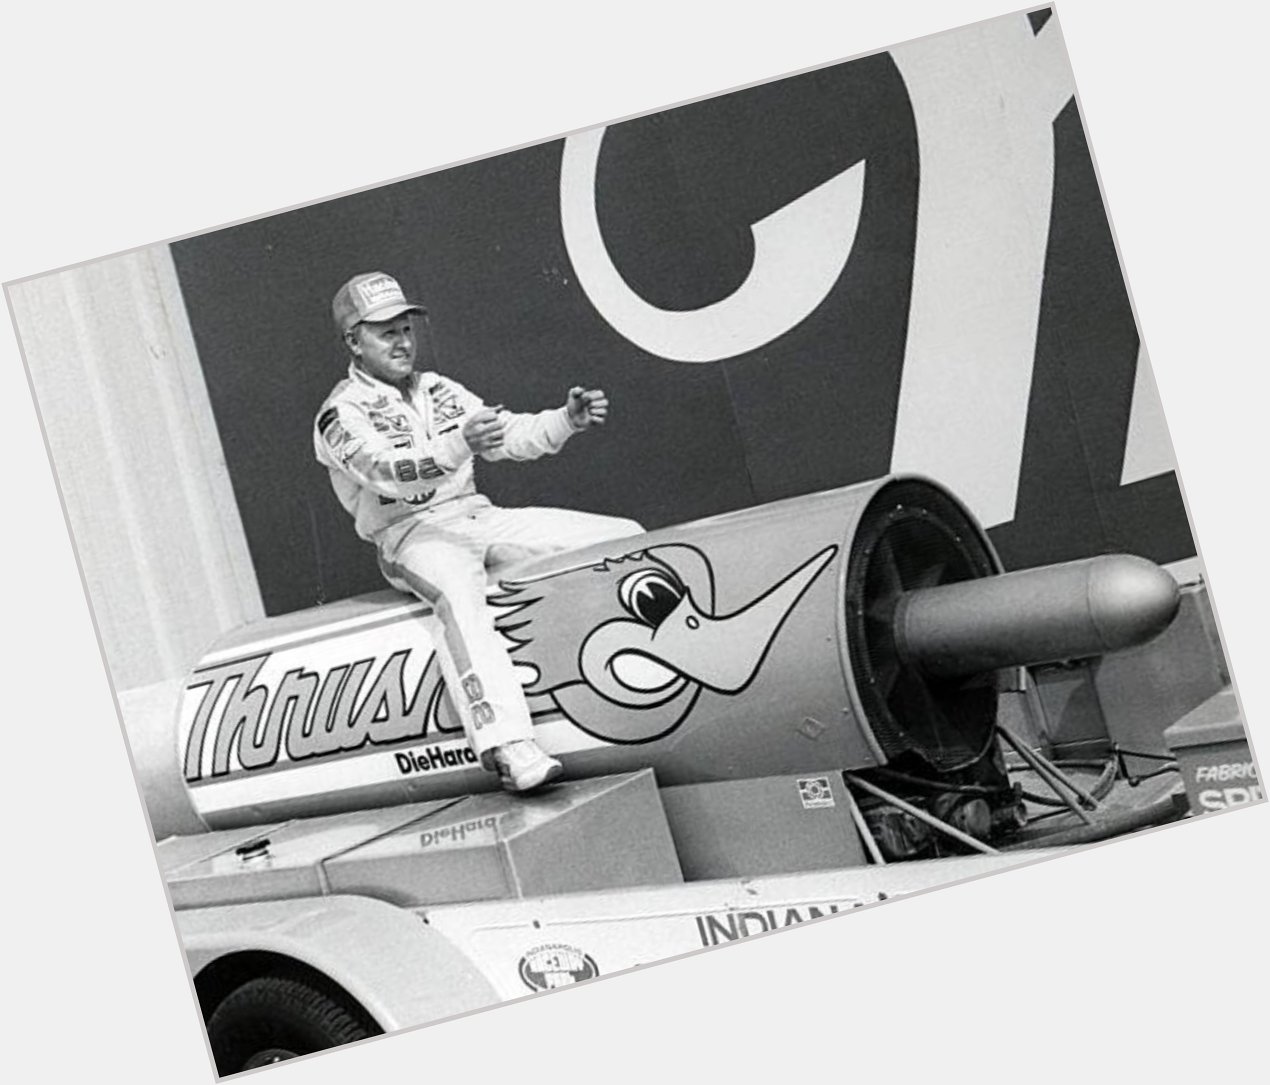 Happy Birthday to Cale Yarborough! Seen here riding a jet engine 